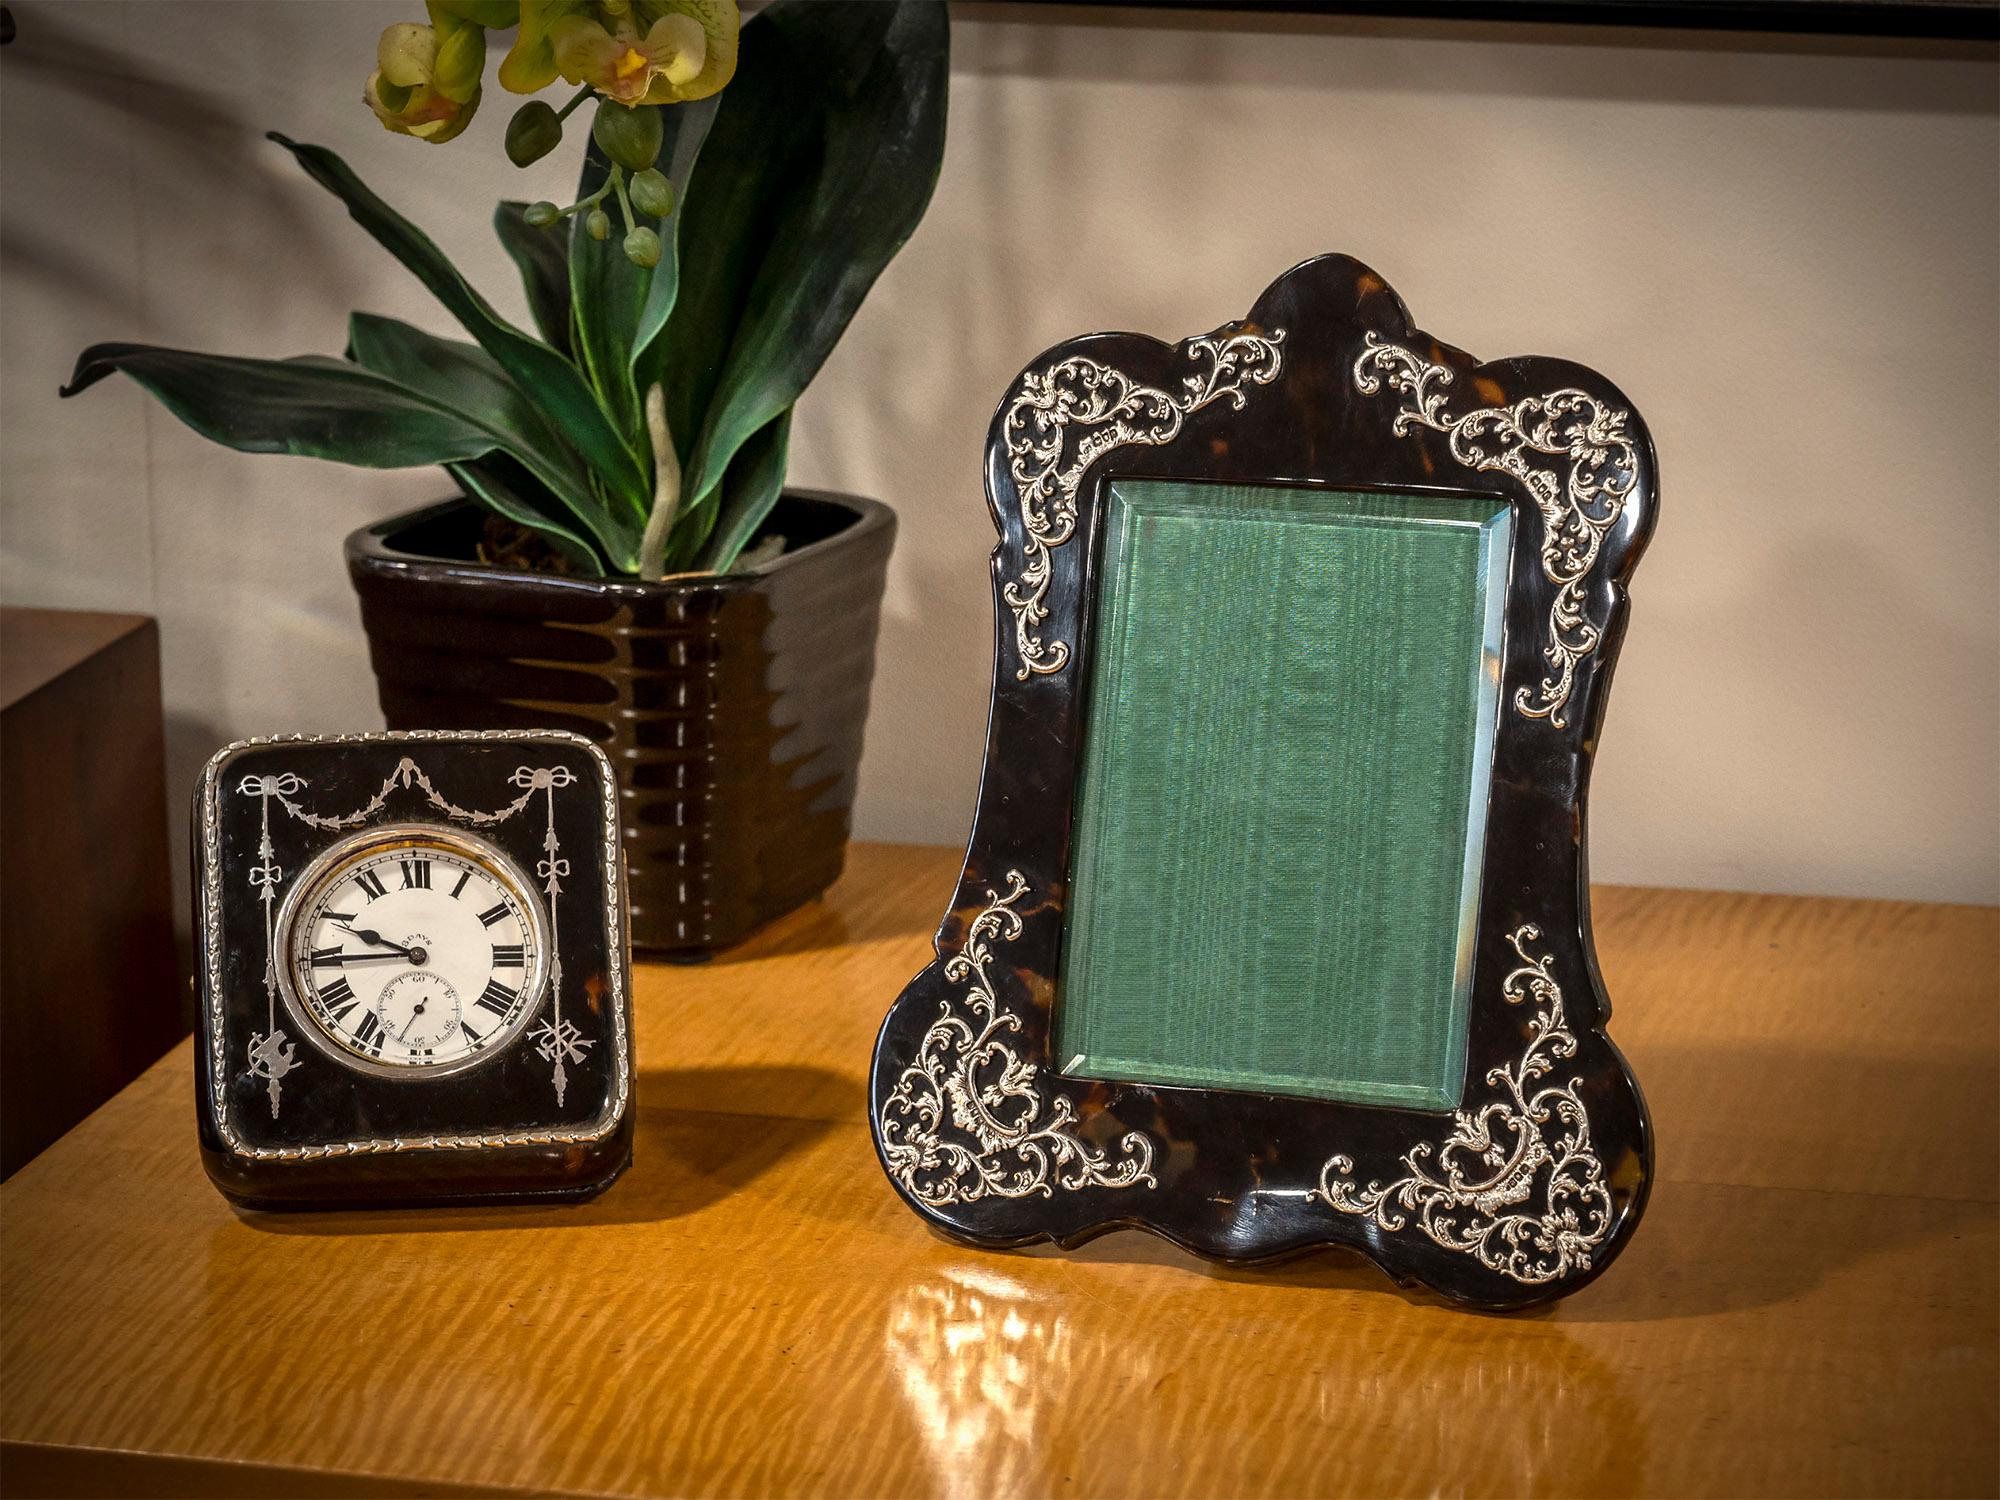 Mounted with Sterling Silver

From our Accessories collection, we are delighted to offer this Silver and Tortoiseshell Picture Frame. The Picture frame beautifully shaped rounded bulbous corners and domed finial top finished in Tortoiseshell. The